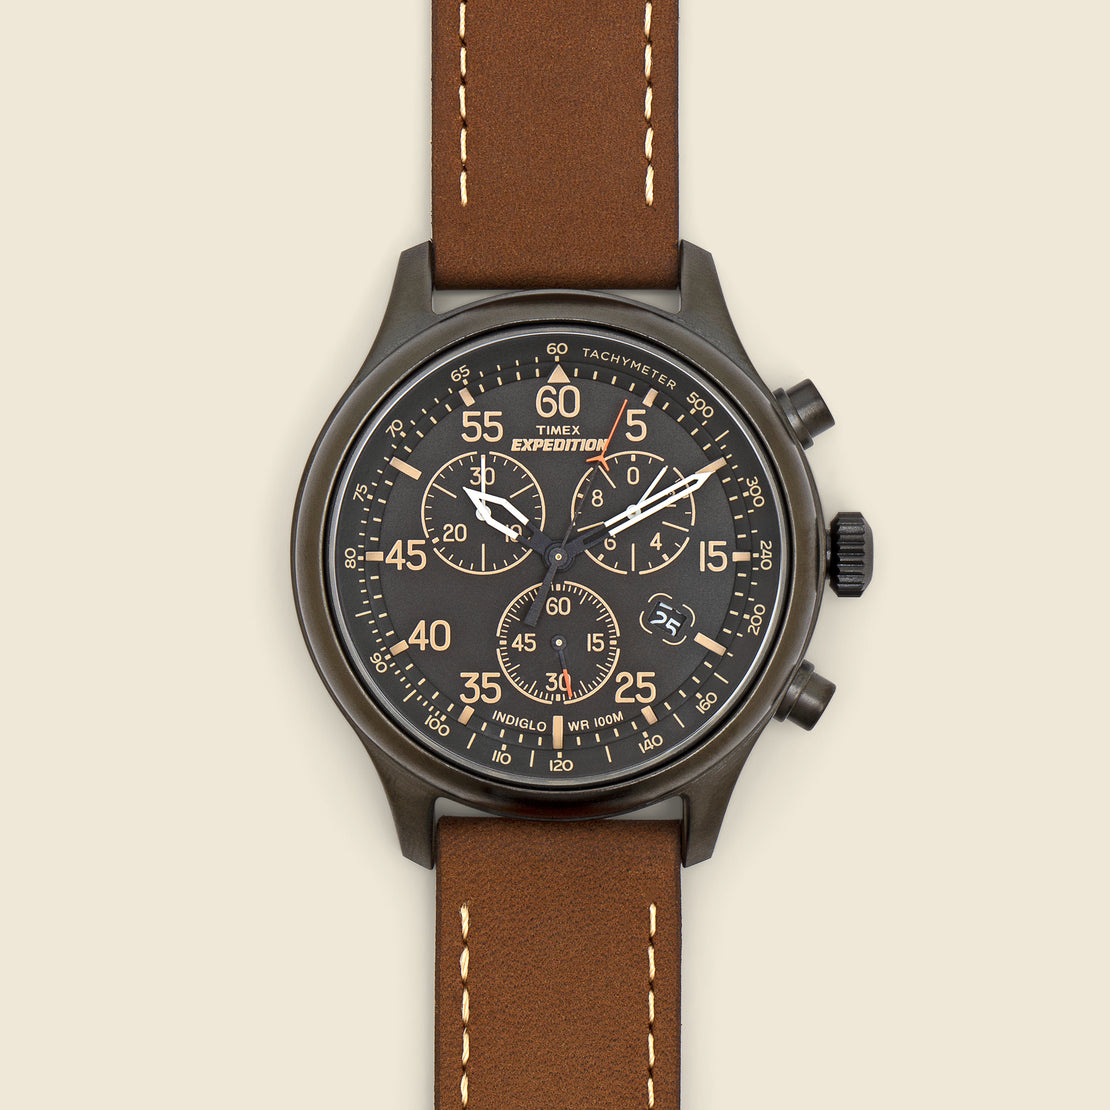 Timex Expedition Field Chronograph Watch 43mm - Black/Brown